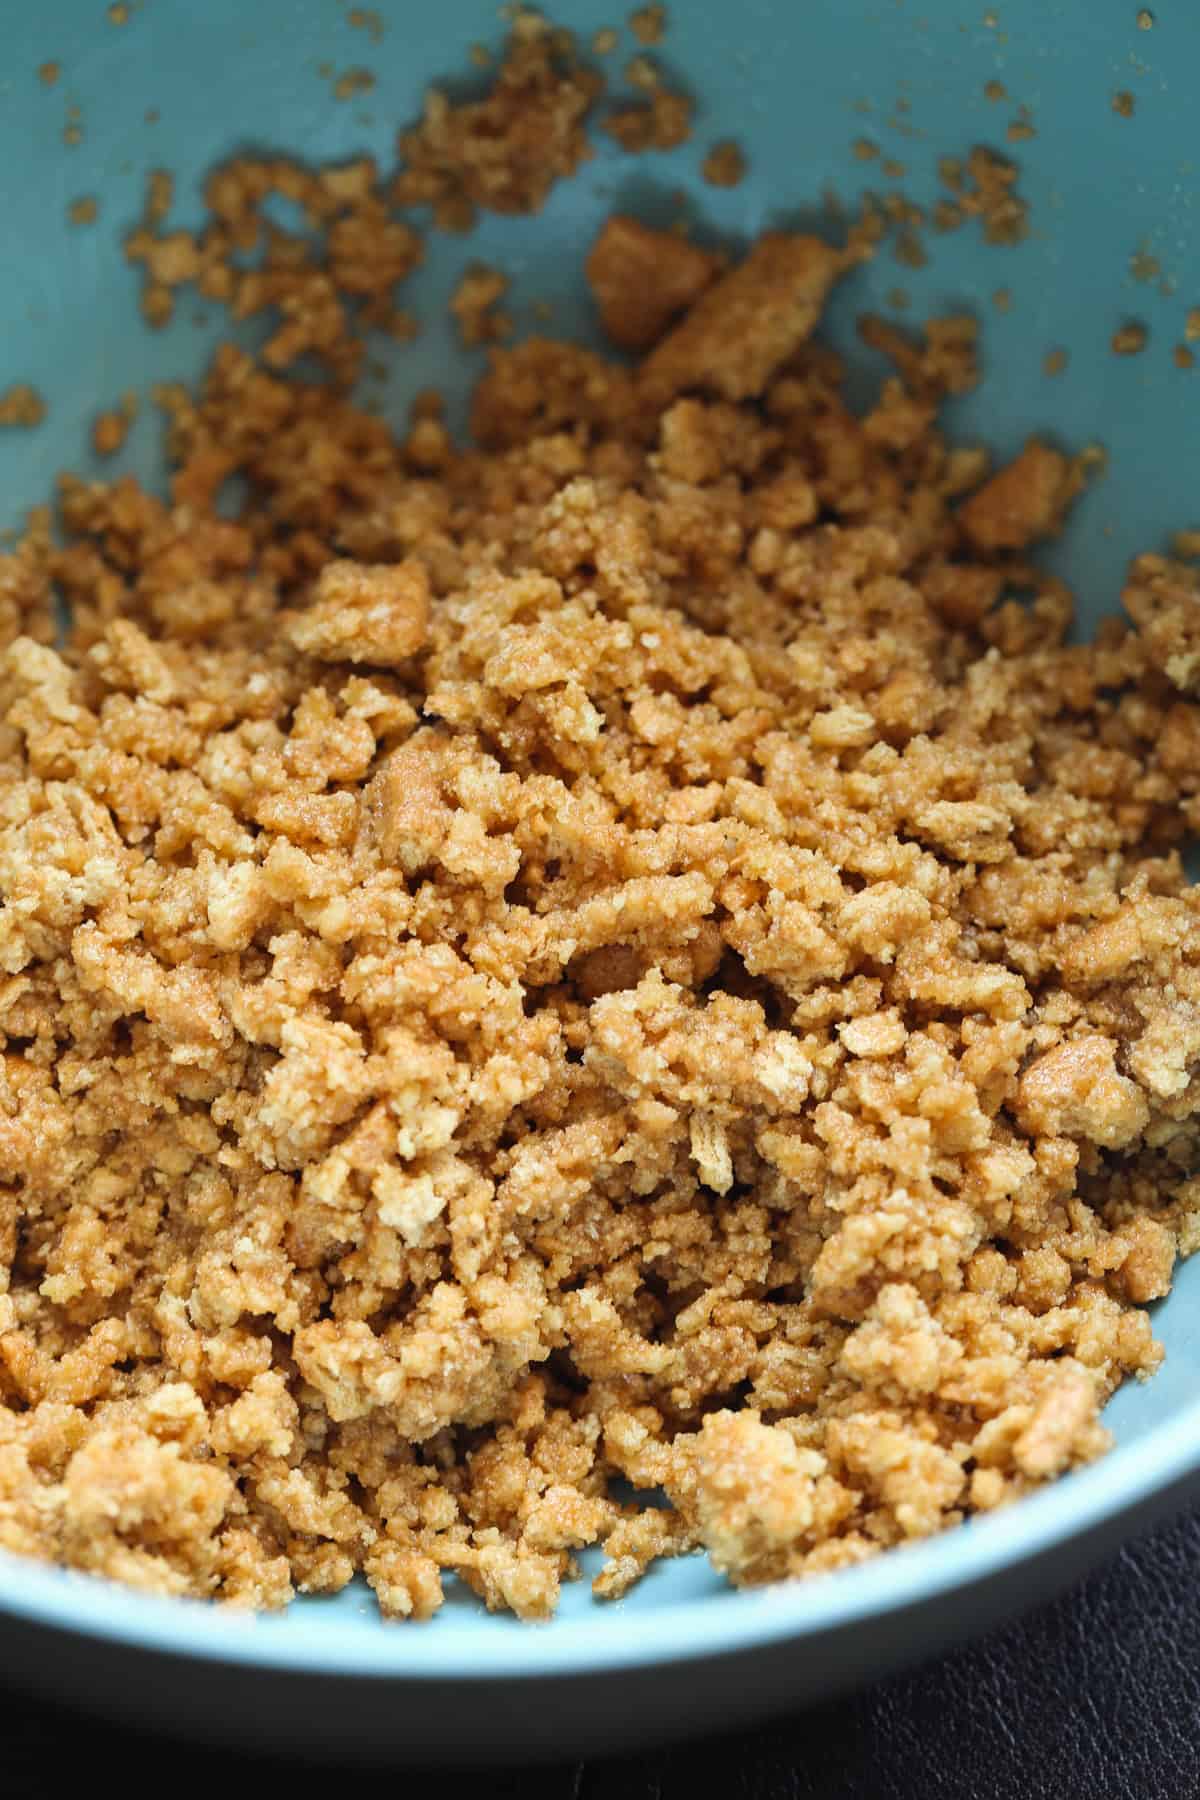 Graham Cracker crumbs mixed with butter and sugar in a blue mixing bowl.